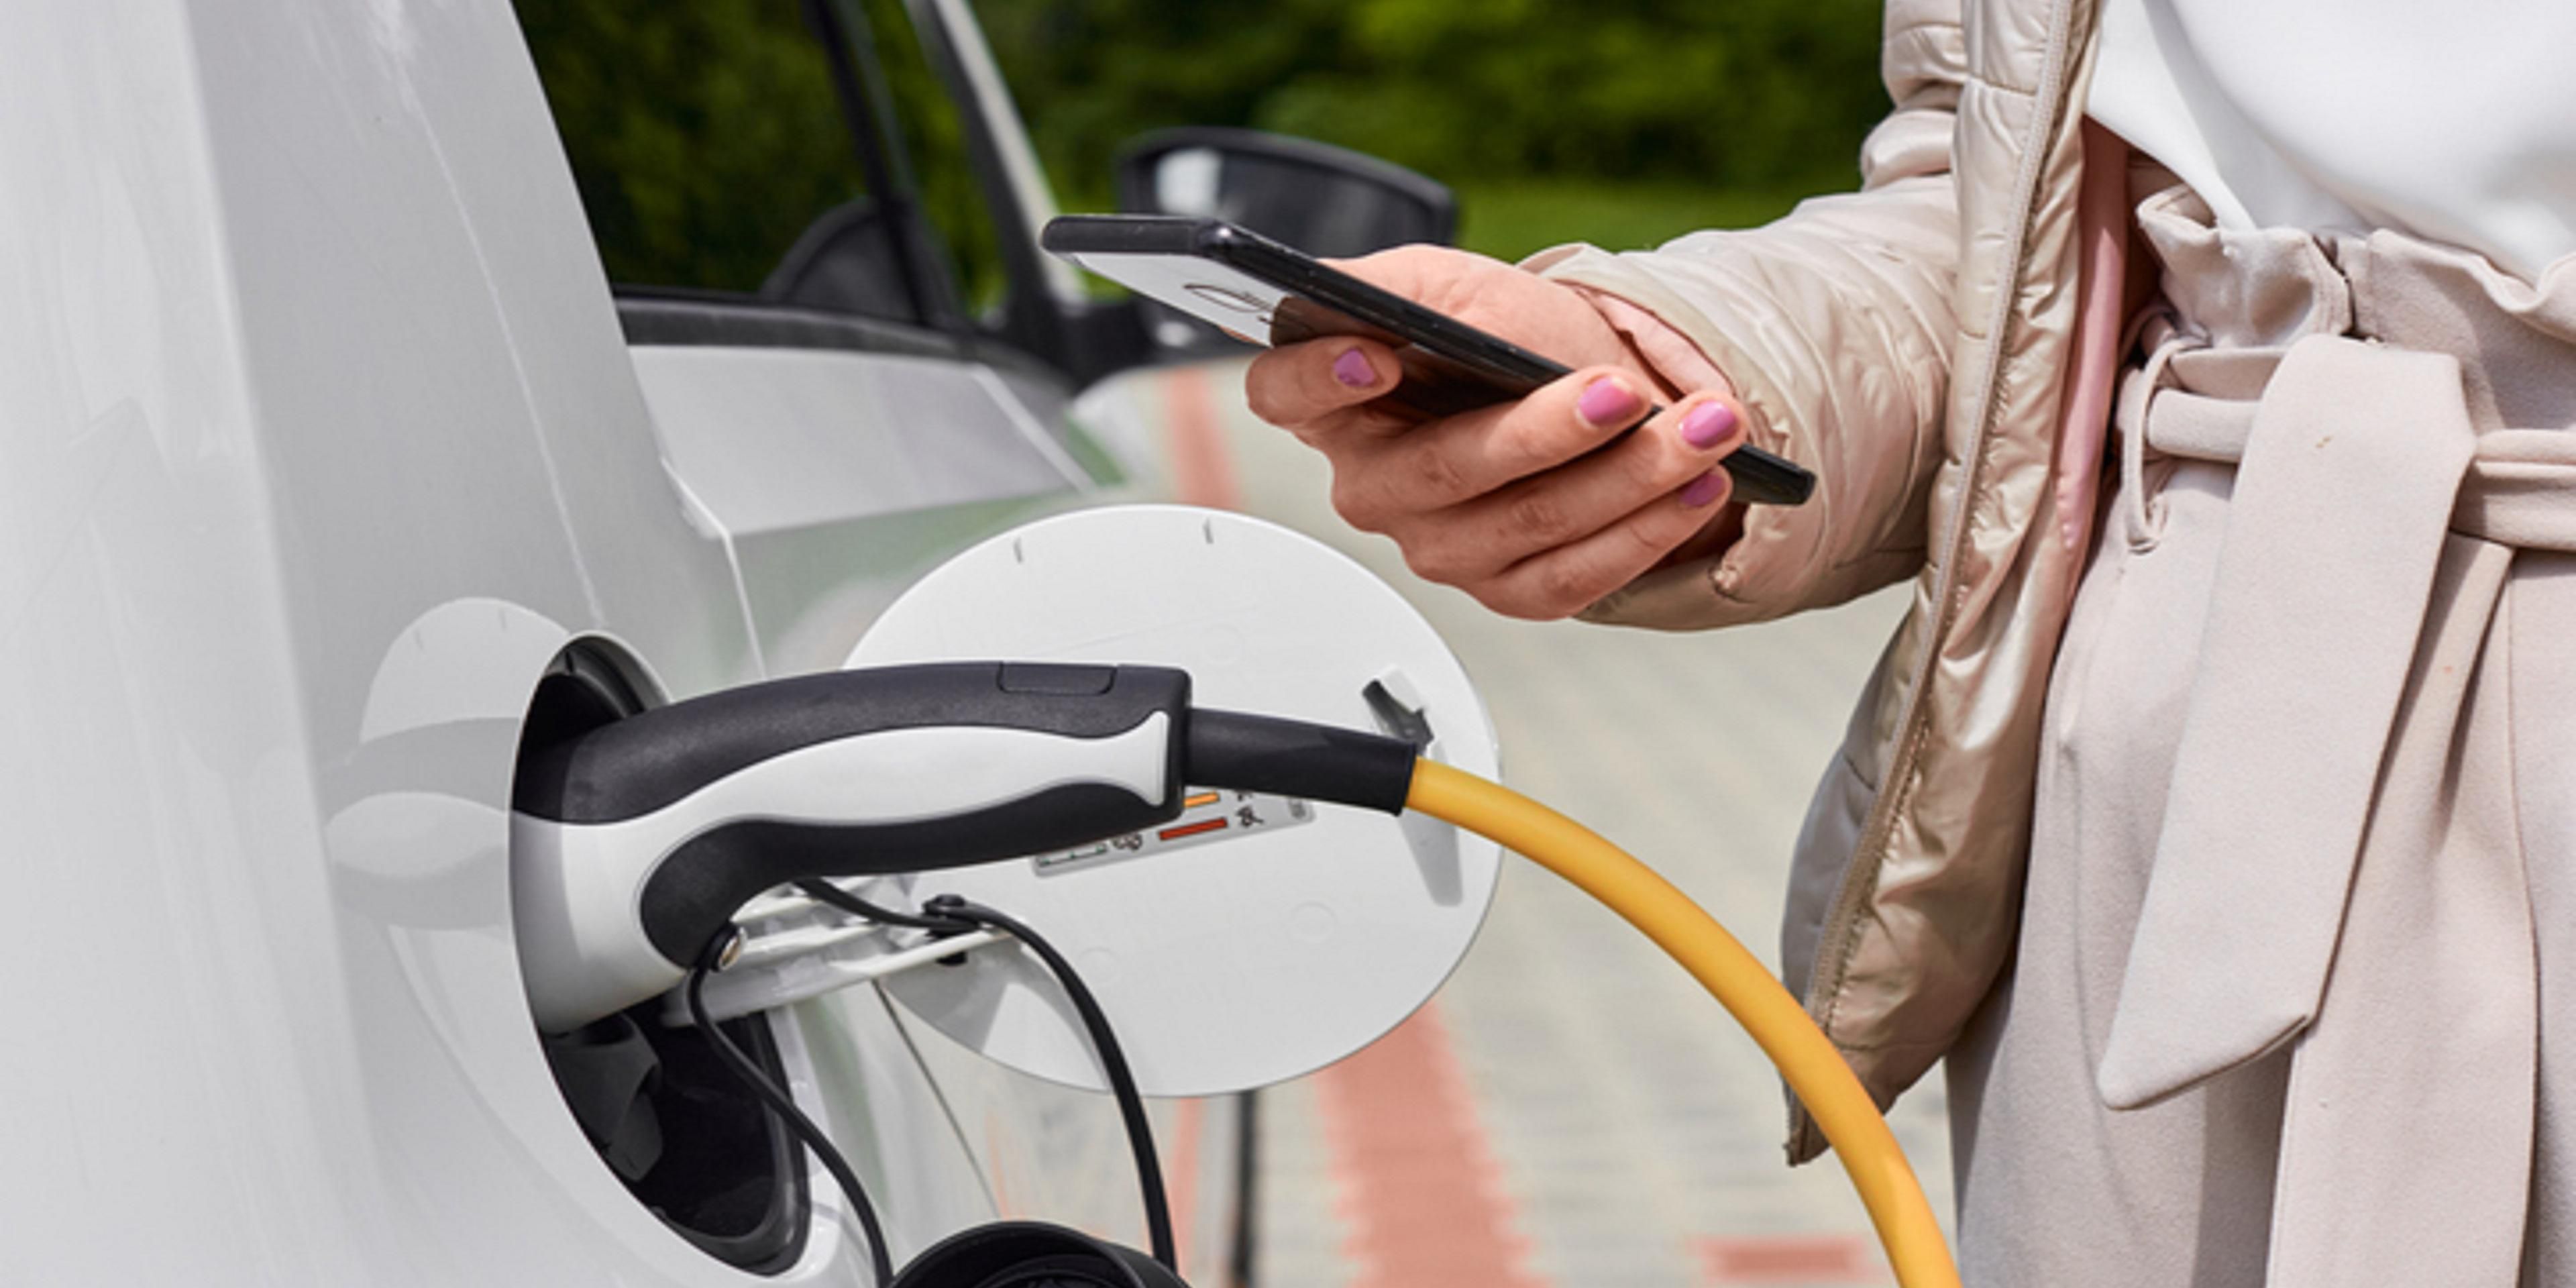 If you drive an electric vehicle, visit one of our convenient electronic charging stations during your stay. Complimentary for guests.